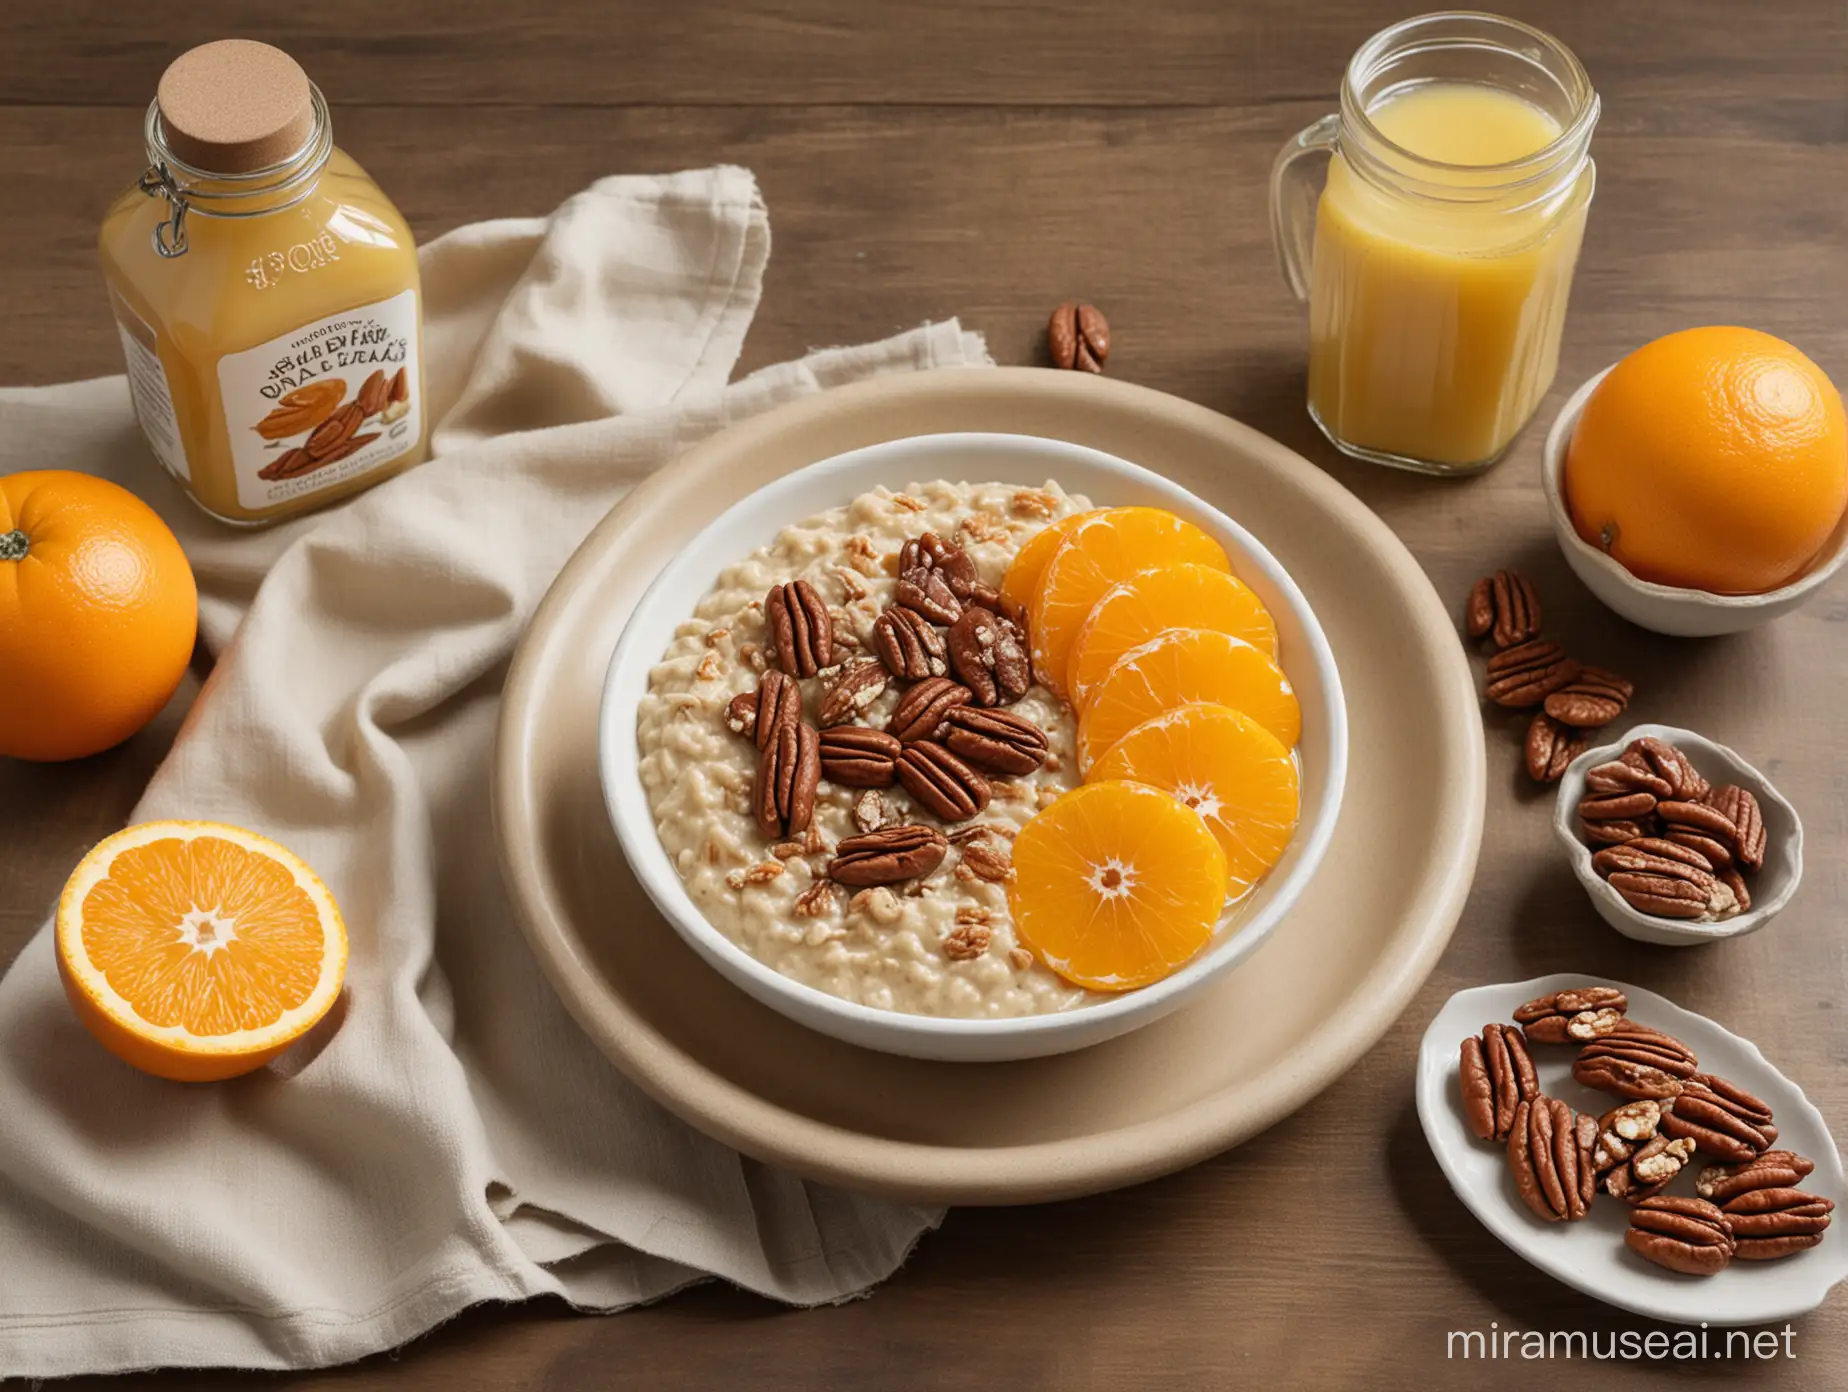 Photorealistic bowl of oatmeal, side plate of 2 boiled eggs, side bowl of sliced oranges honey drizzle and roasted pecans, cup of  broth, bottle of lemon infused water 